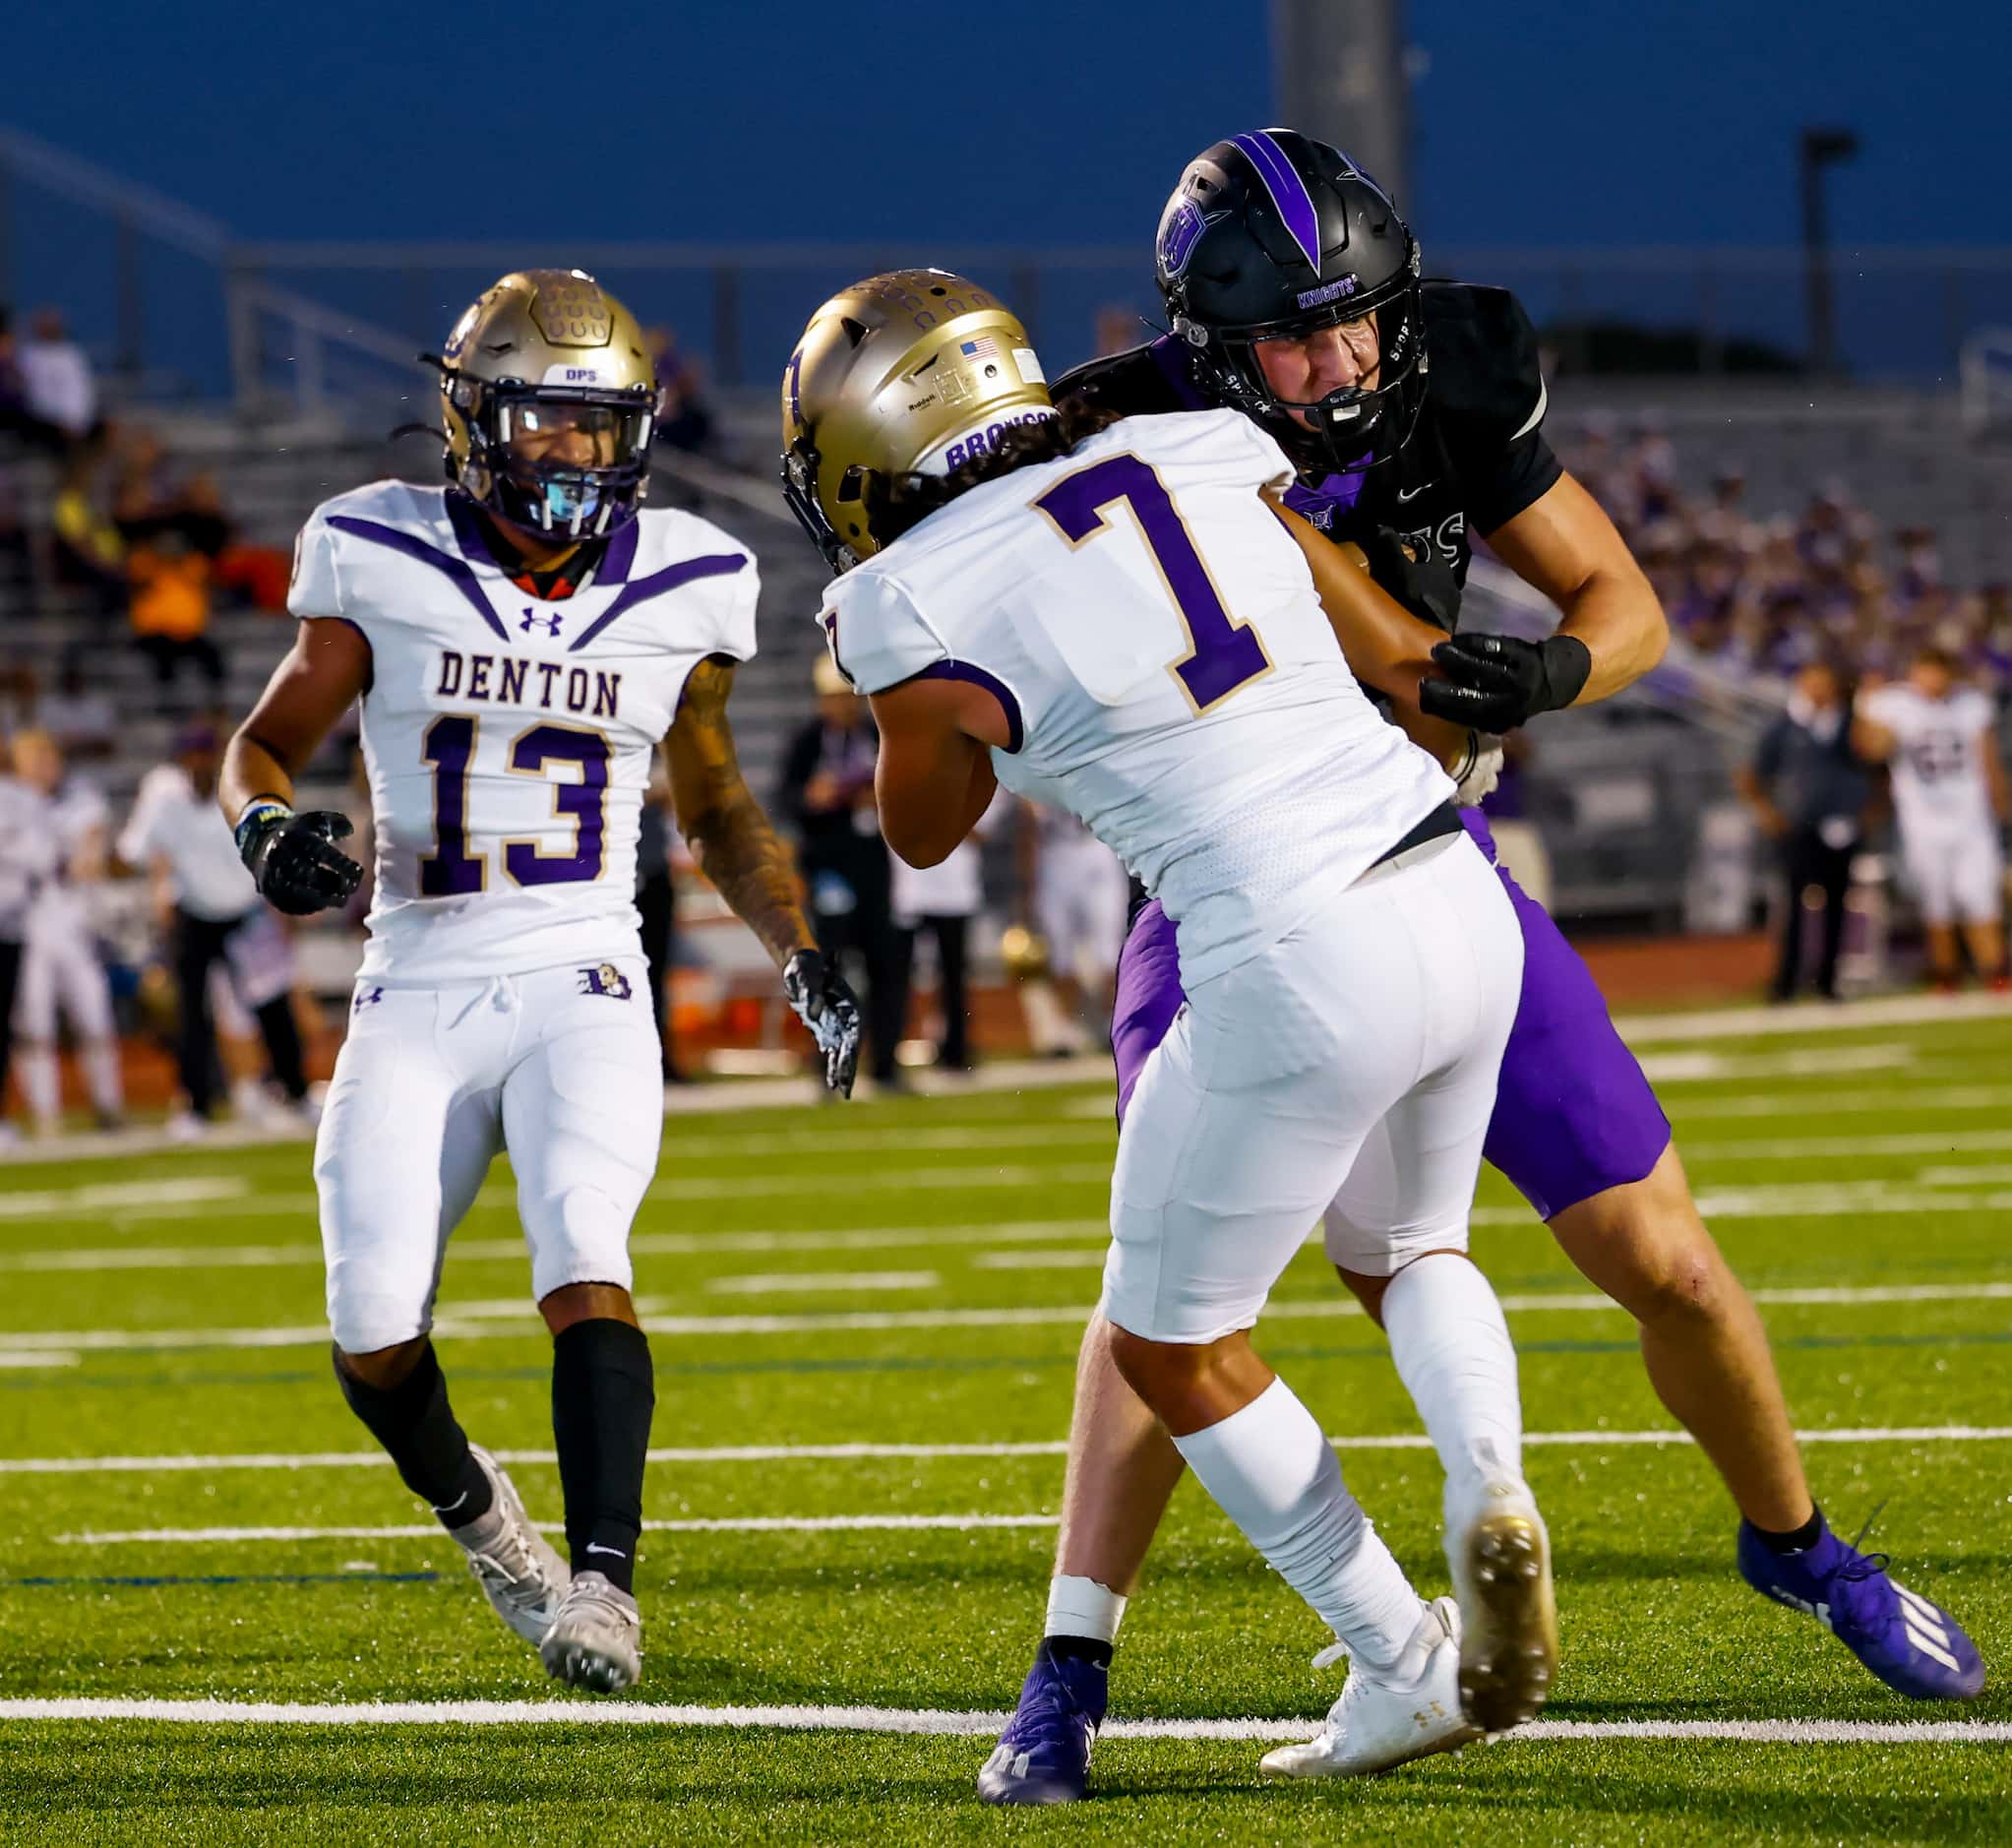 Frisco Independence’s tight end Jake Simpson (88) carries the ball as he pushes Denton’s...